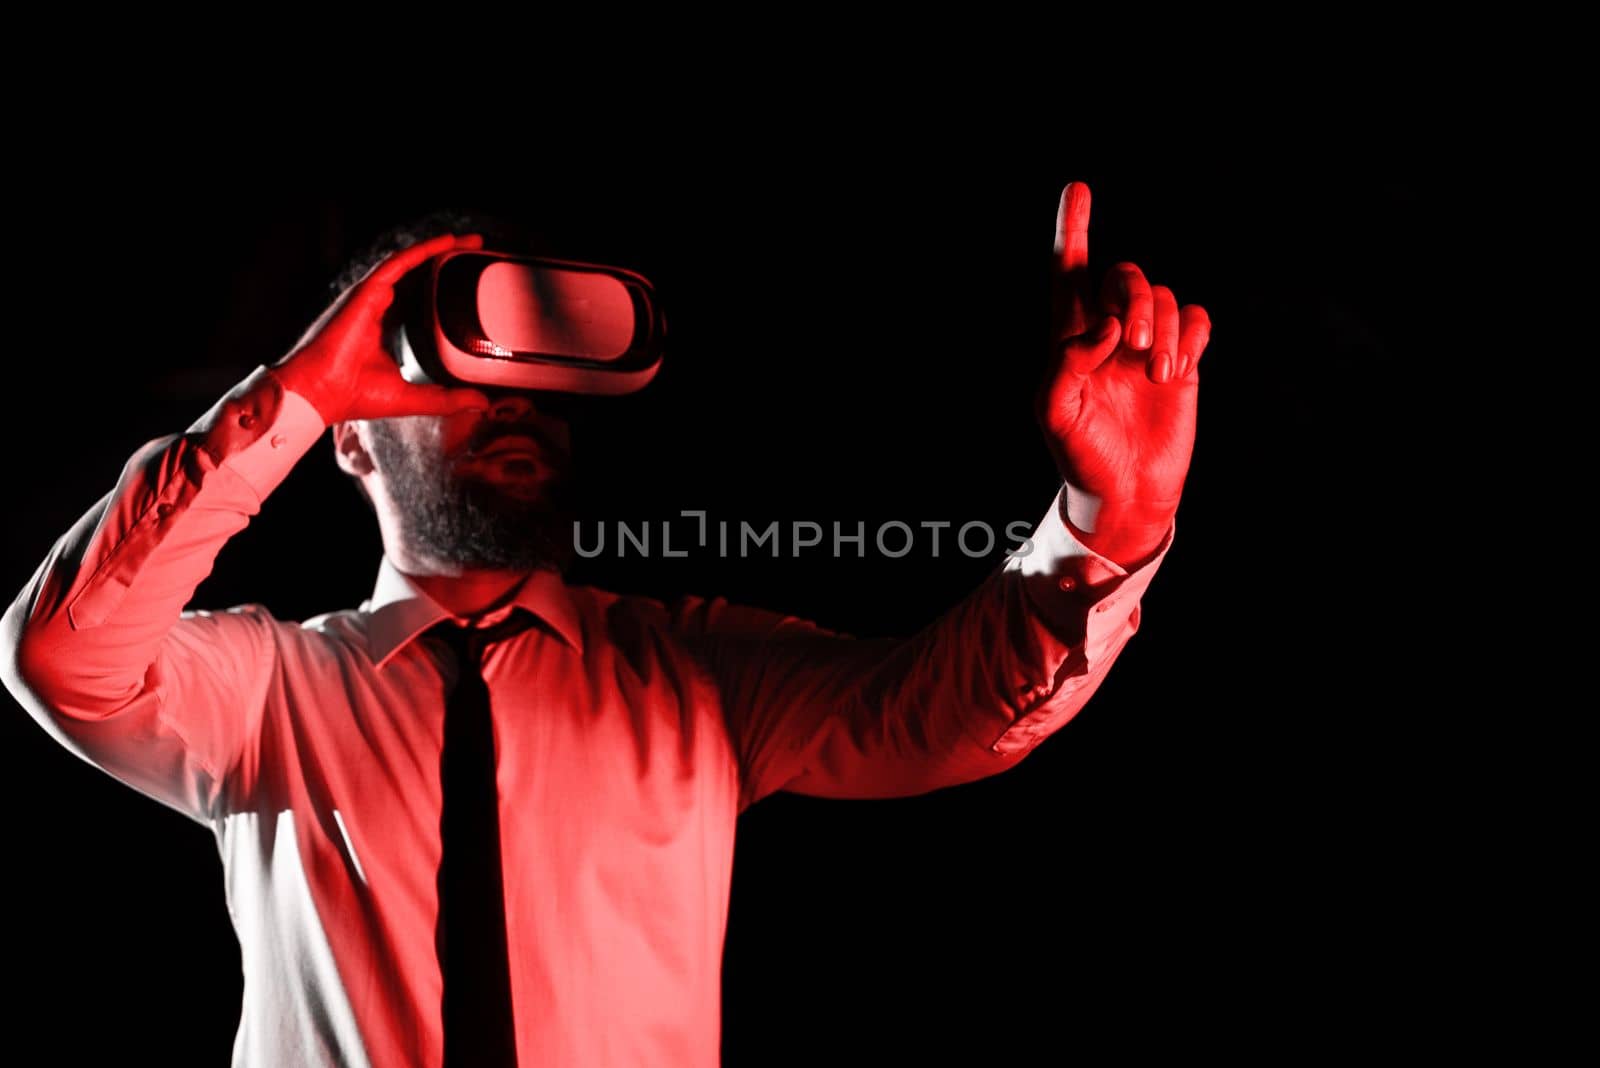 Man Wearing Vr Glasses And Pointing On Important Messages With One Finger. Businessman Having Virtual Reality Eyeglasses And Showing Crutial Informations. by nialowwa